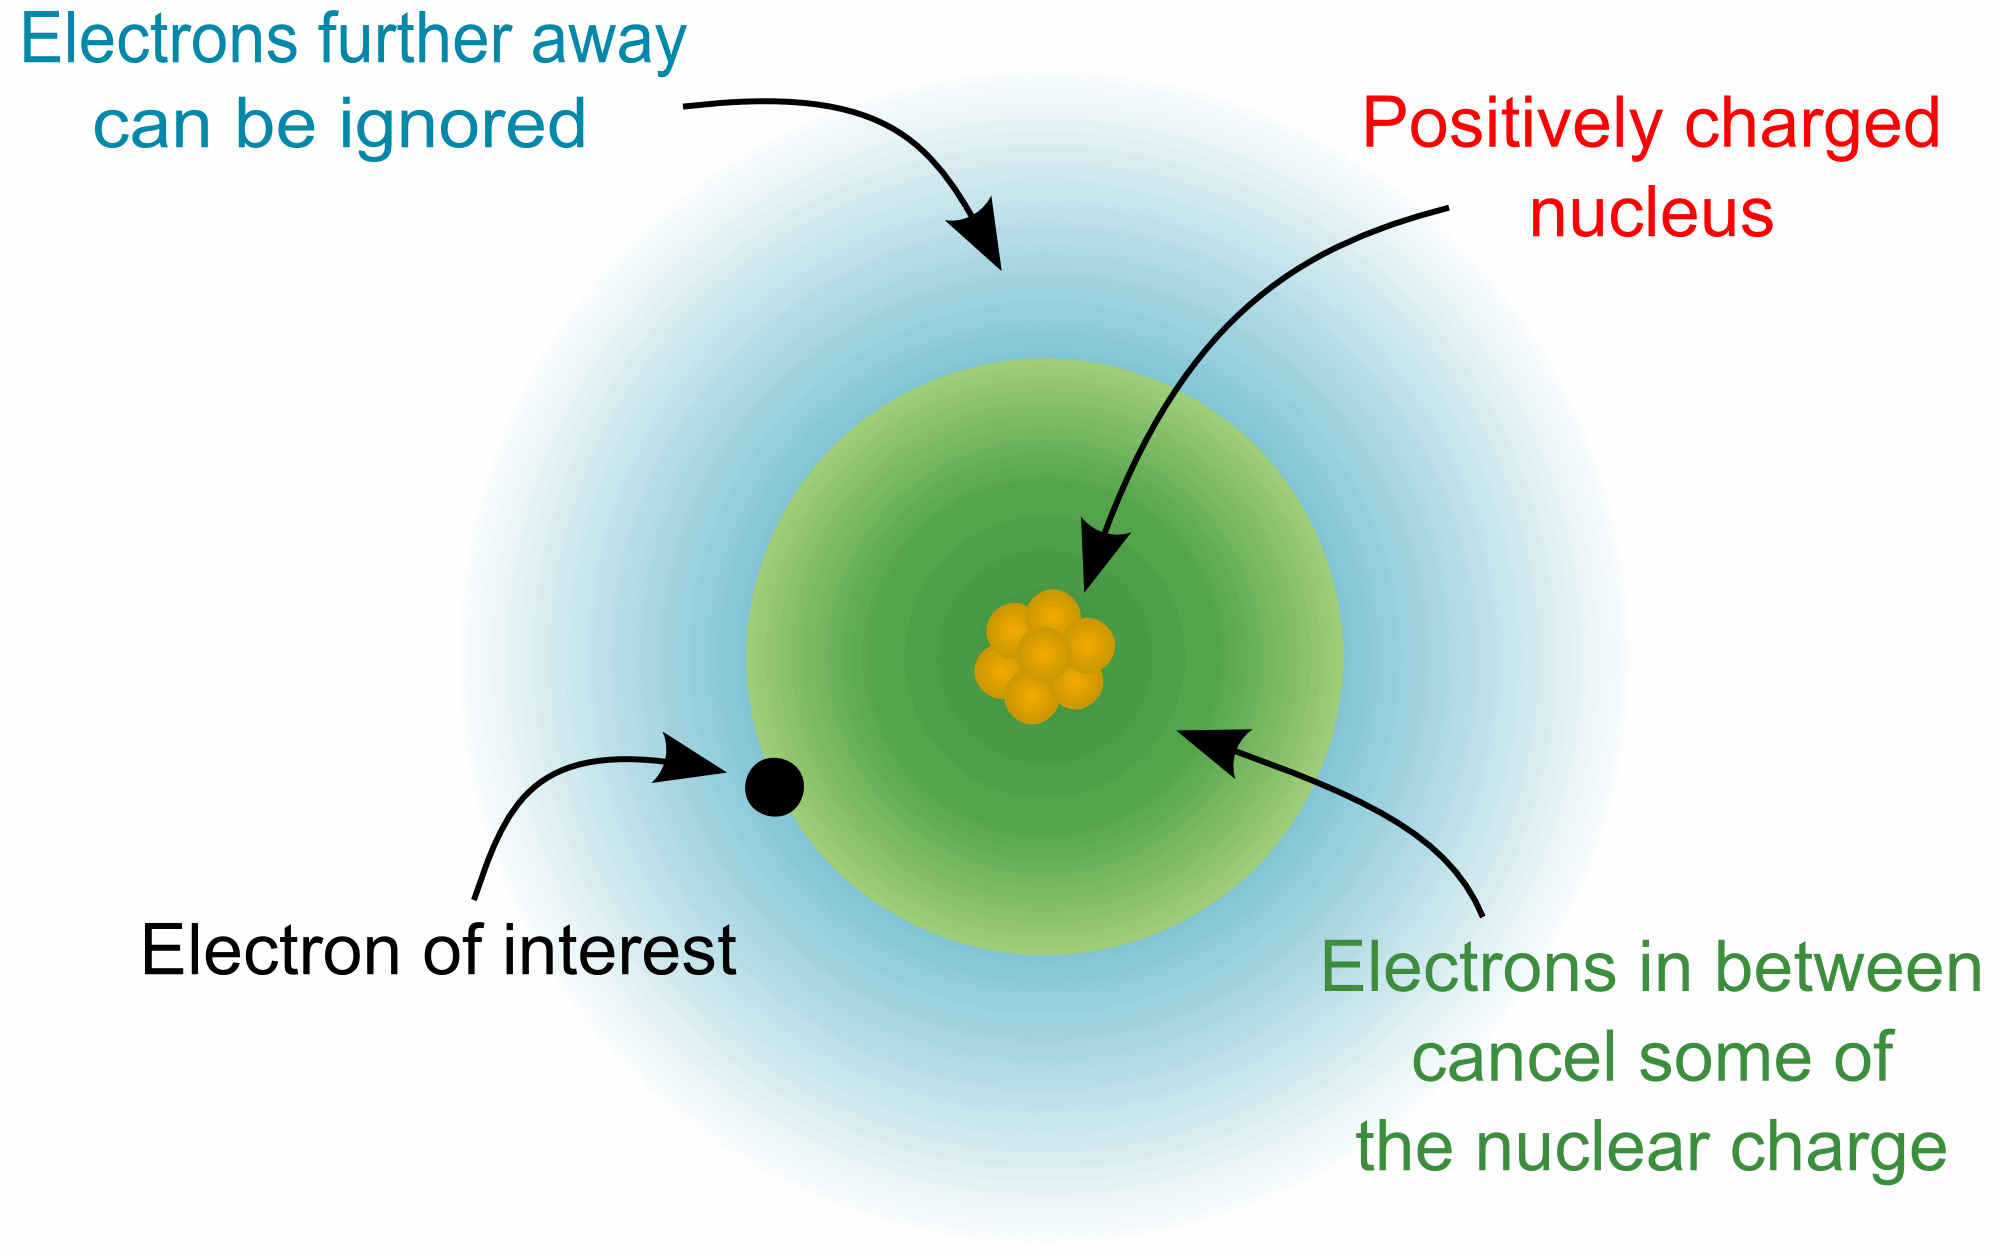 effective nuclear charge